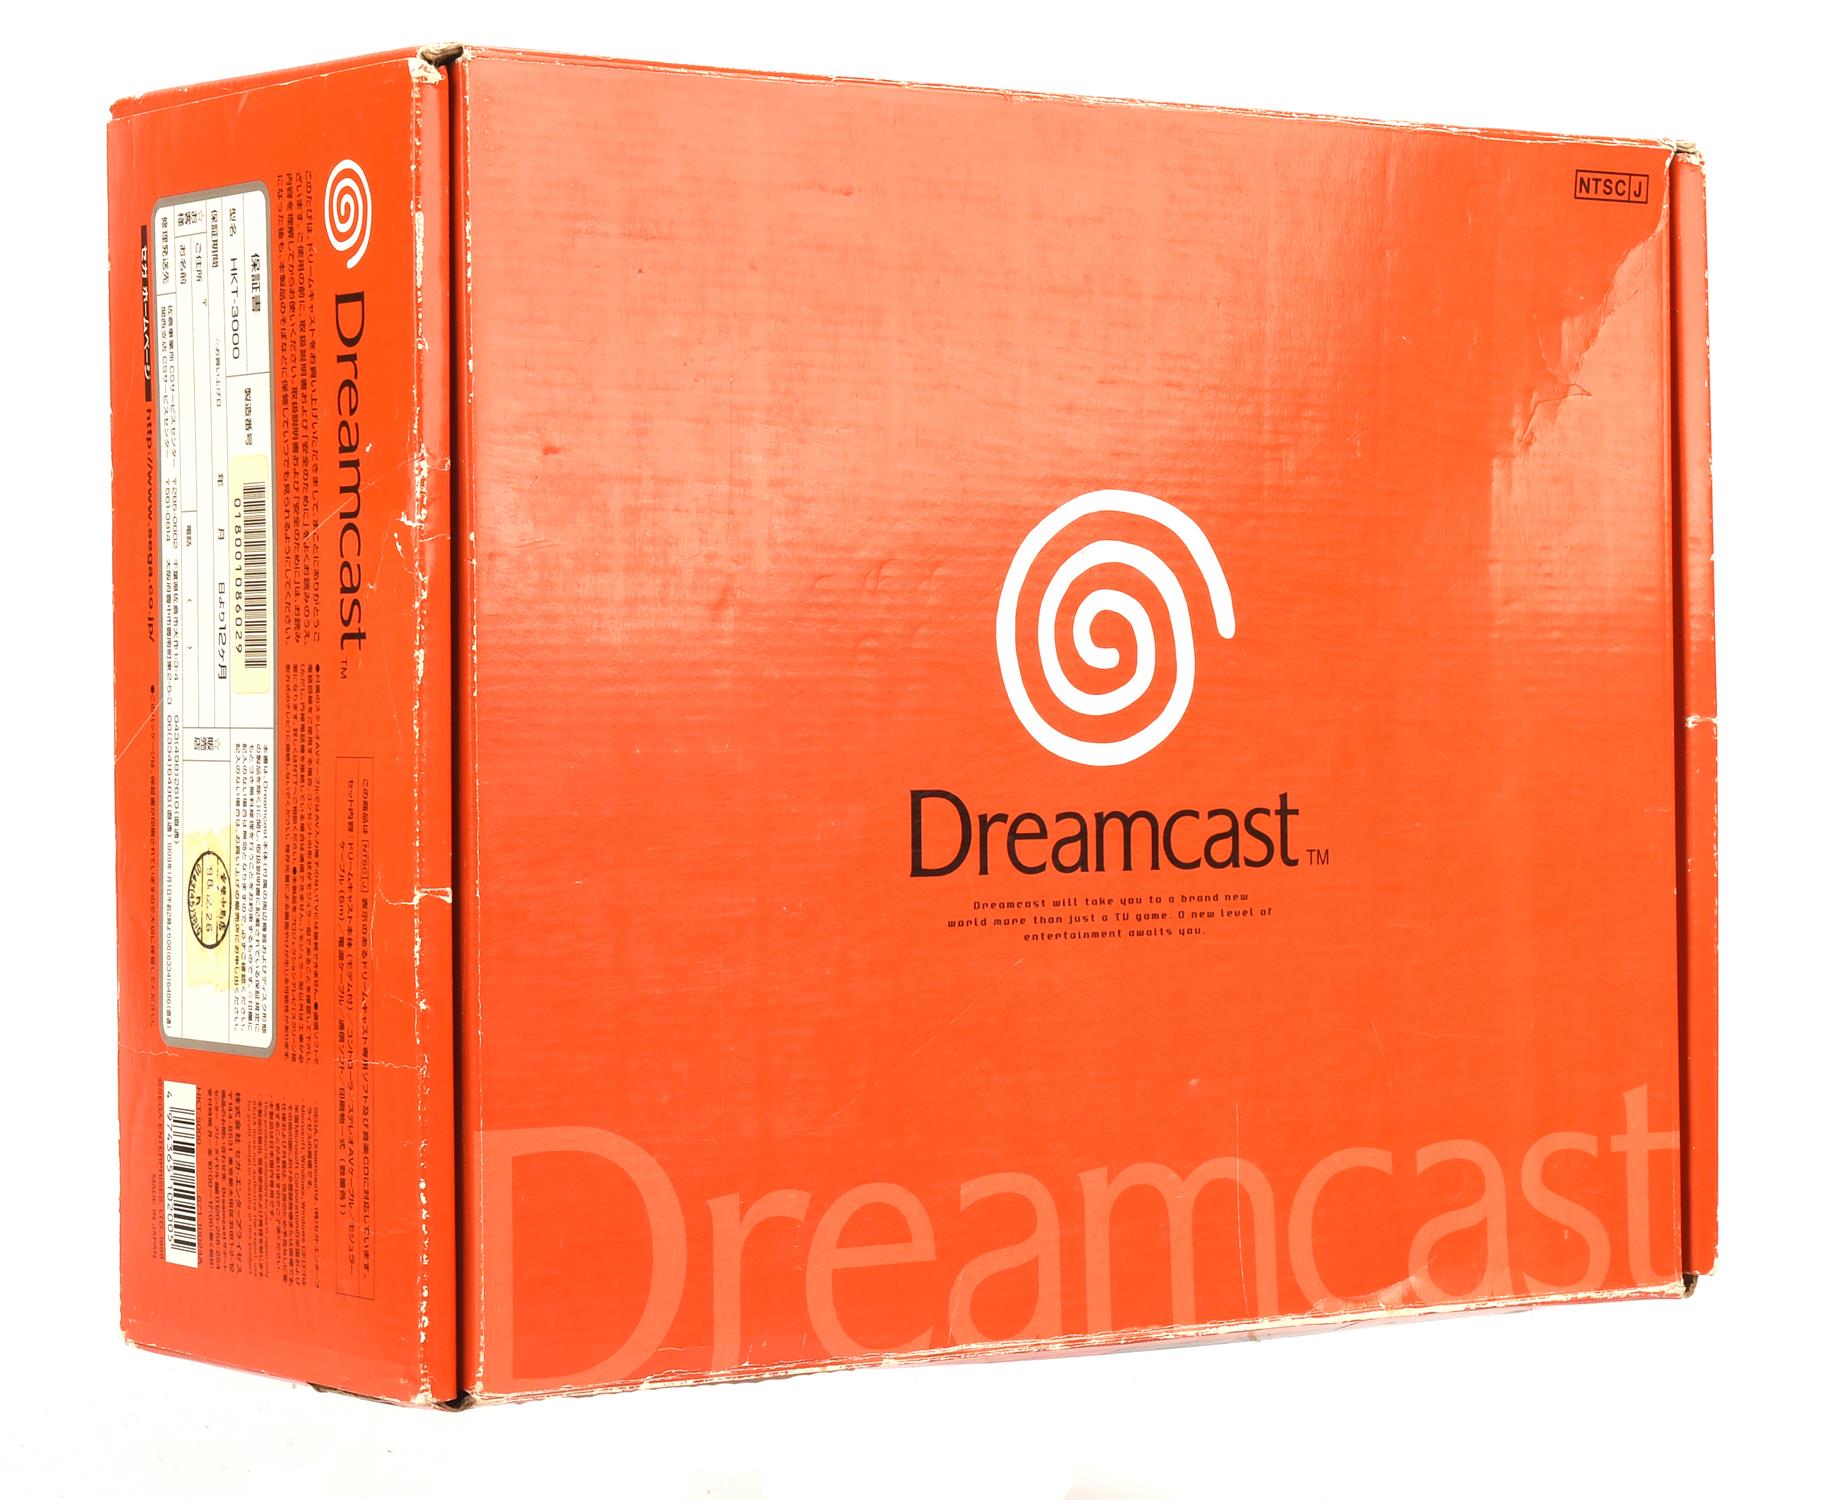 Japanese Sega Dreamcast console, complete and boxed (NTSC-J) Console comes with 1 controller,